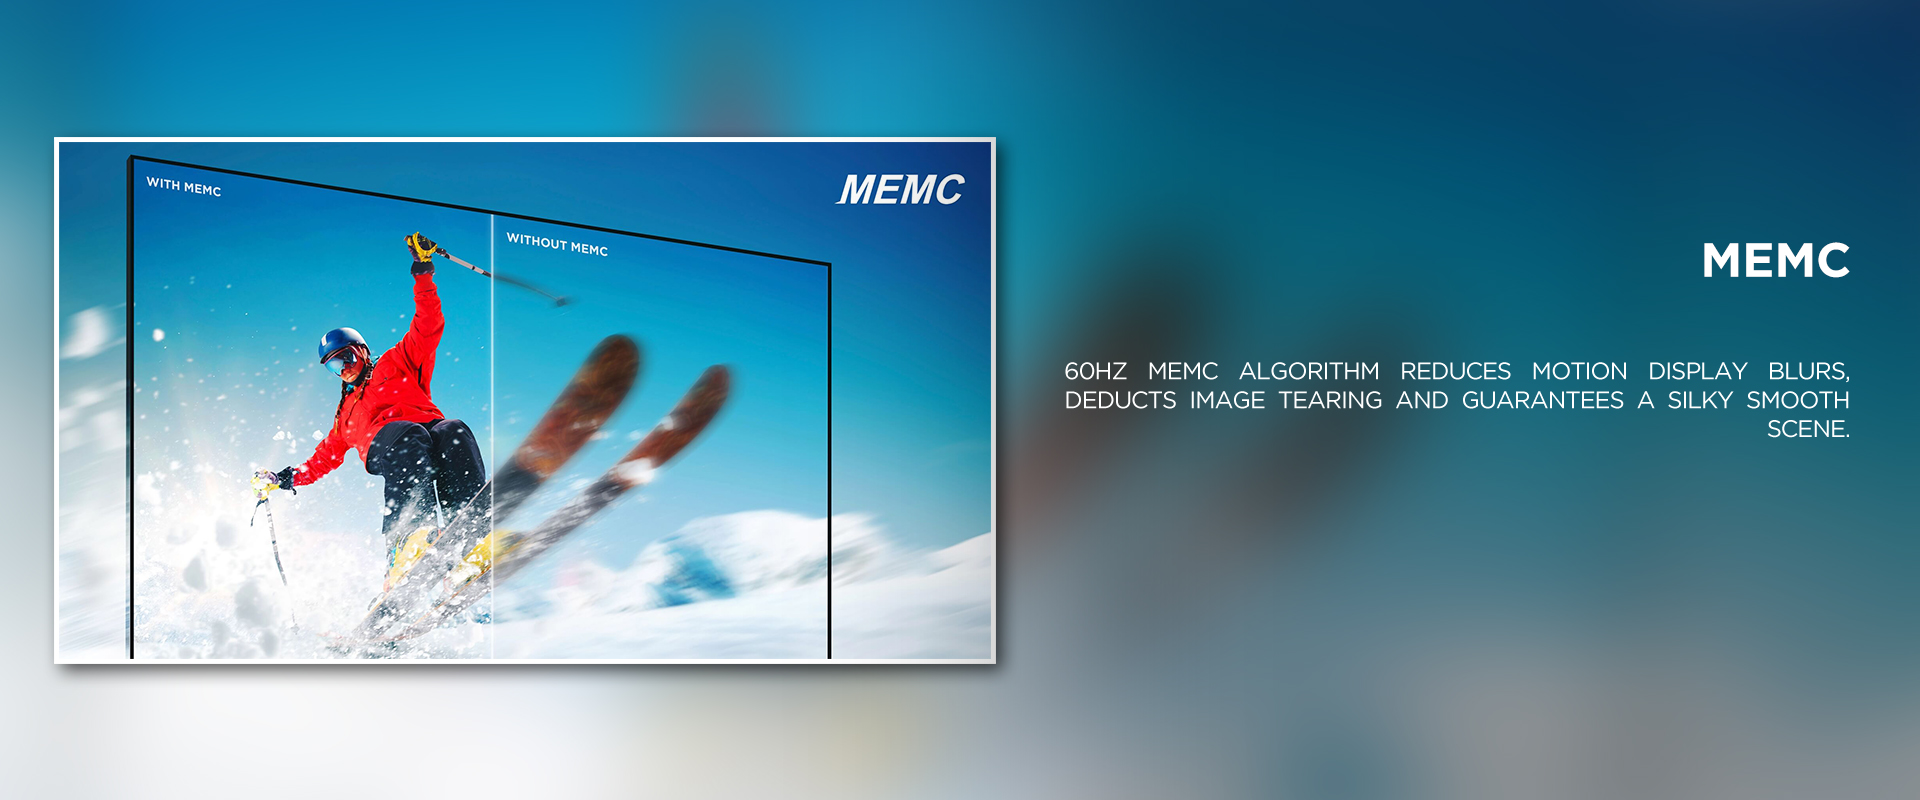 MEMC - 60Hz MEMC algorithm reduces motion display blurs, deducts image tearing and guarantees a silky smooth scene.